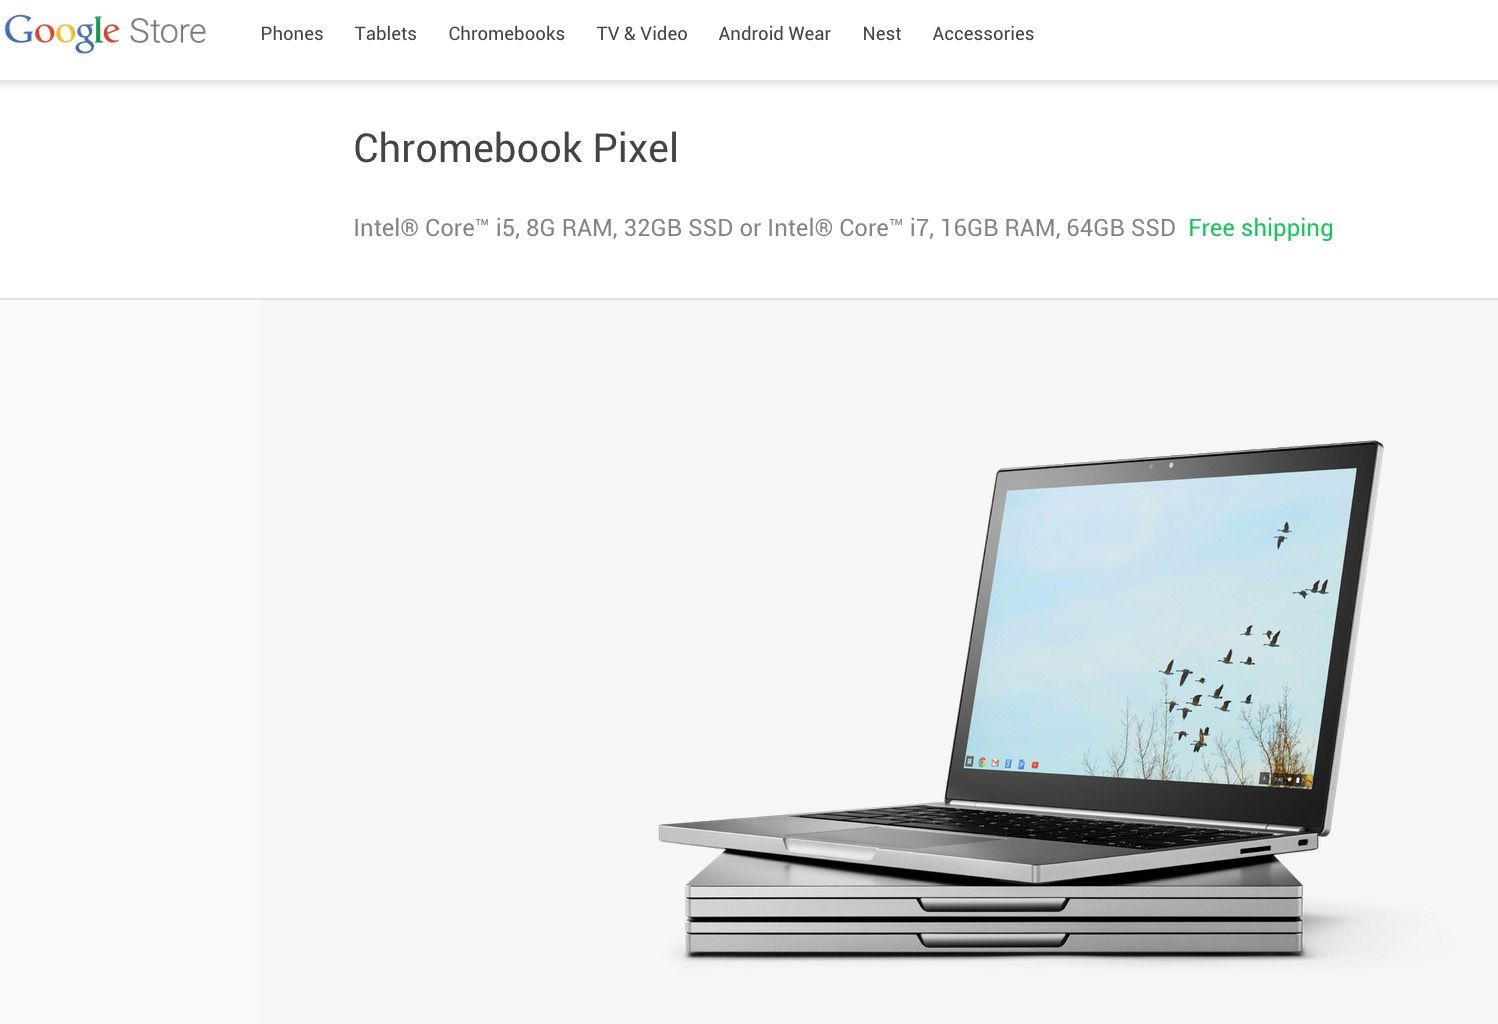 google now sells all hardware products through new store called google store image 2